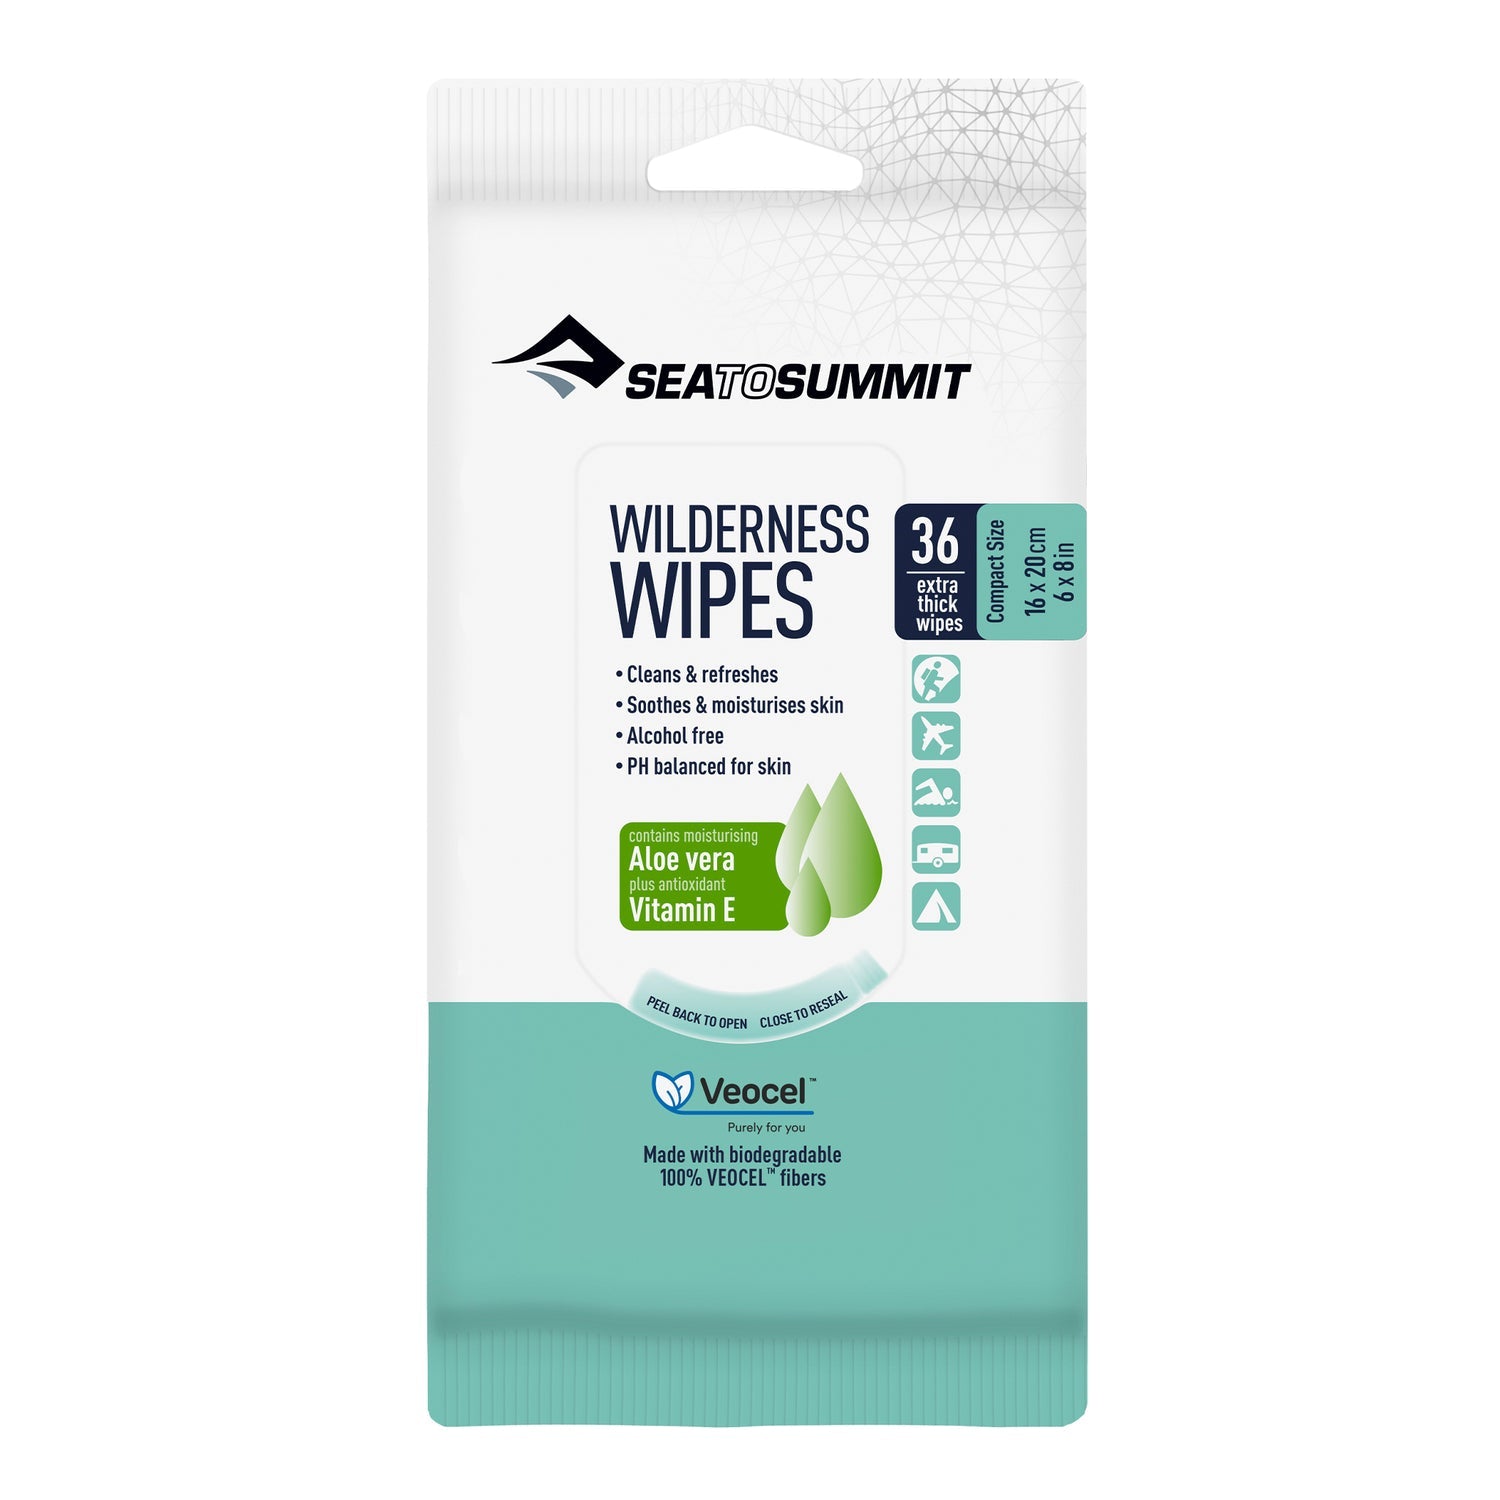 Sea to Summit Wilderness Wipes - Compact 36 Pack